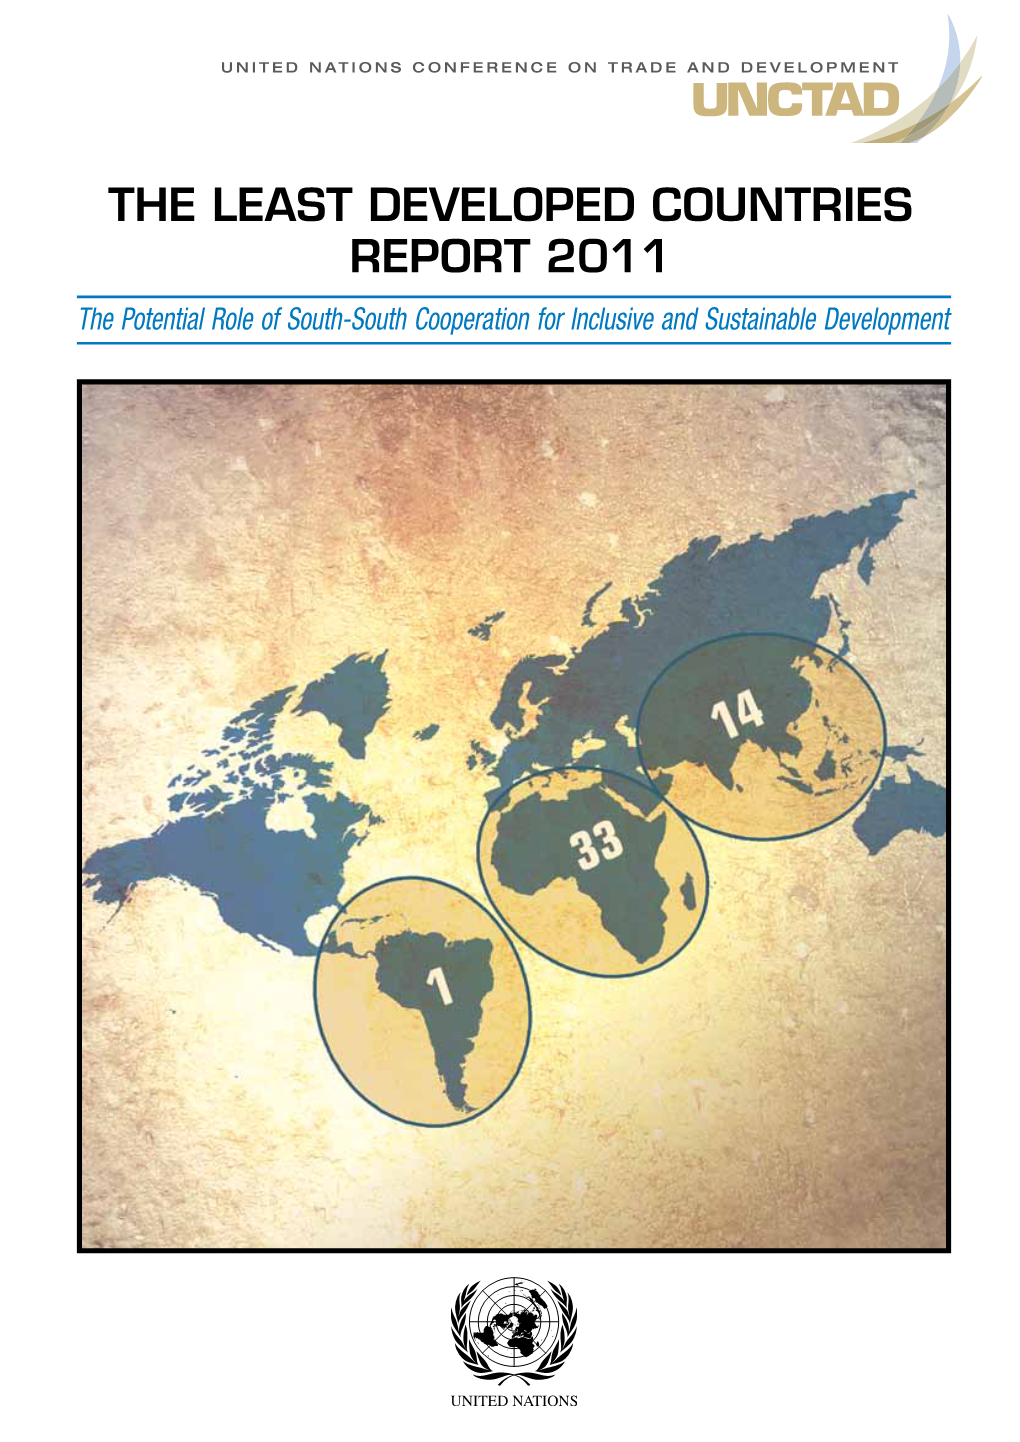 The Least Developed Countries Report 2011